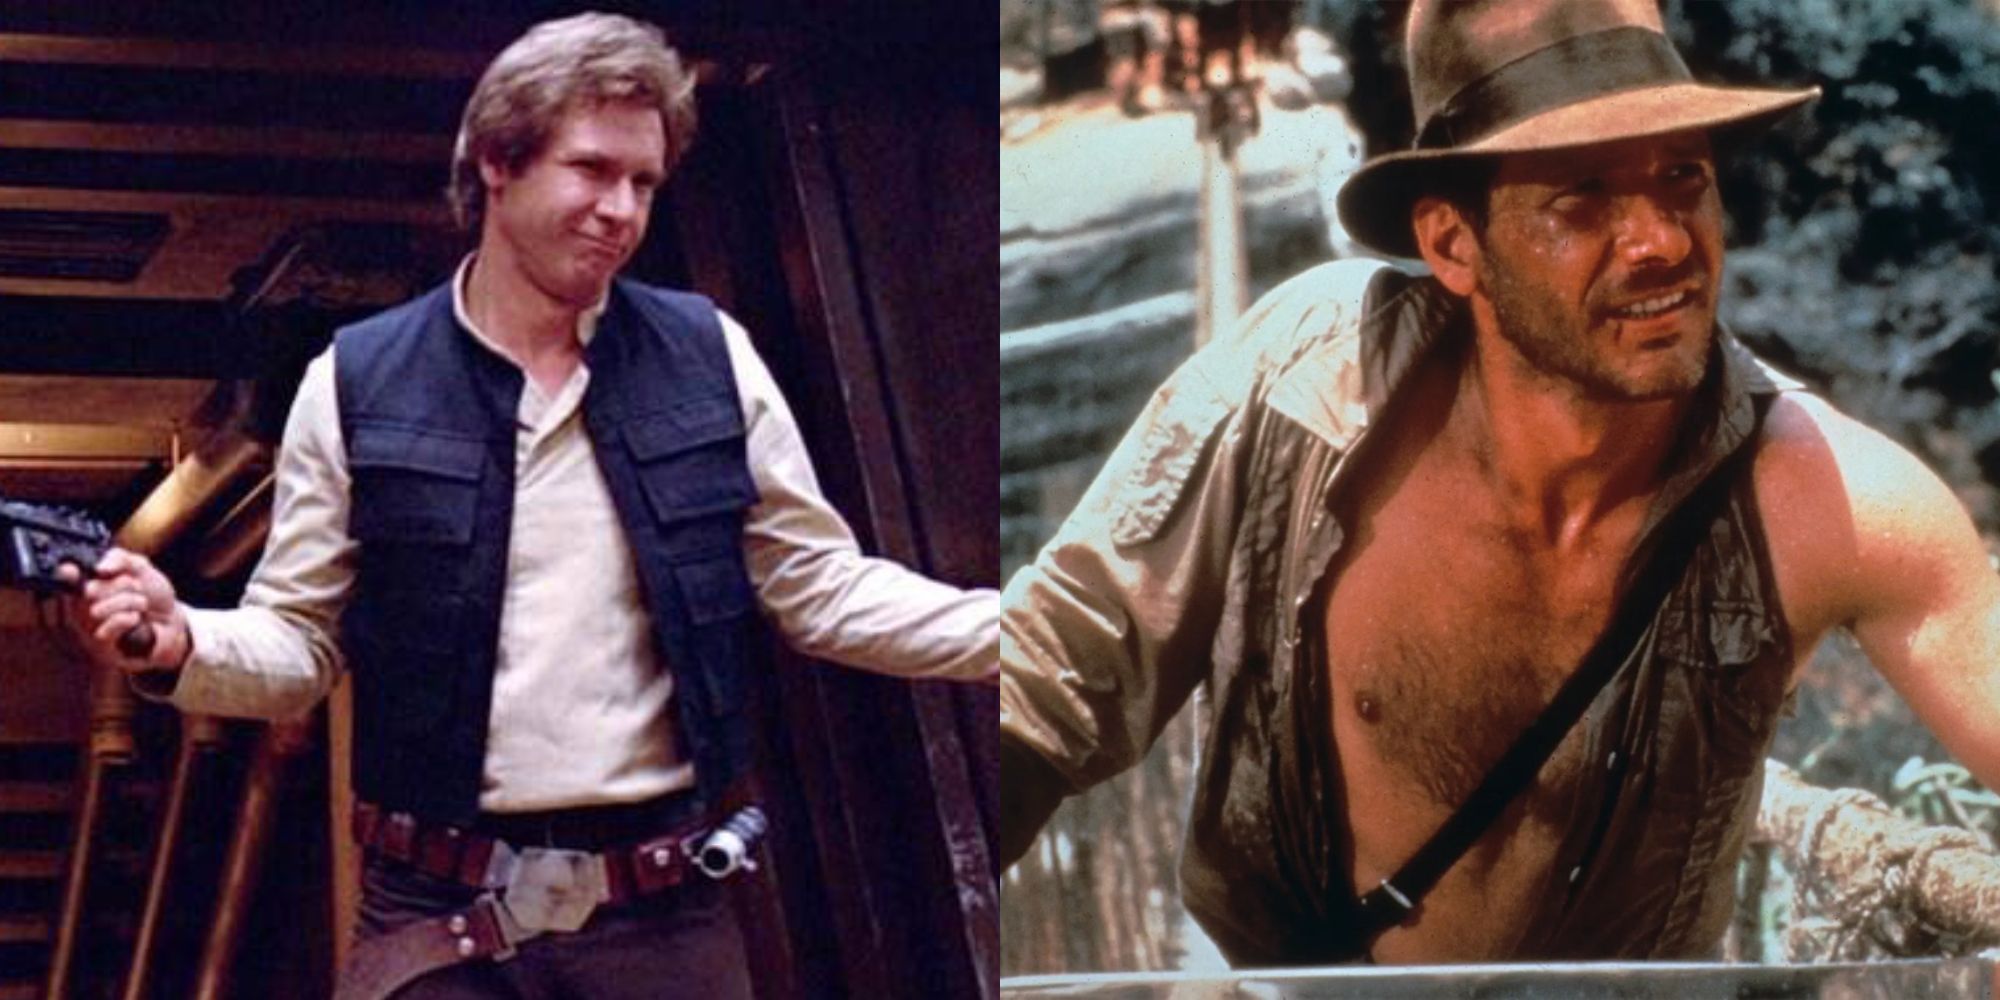 Harrison Ford as Han Solo and Indiana Jones